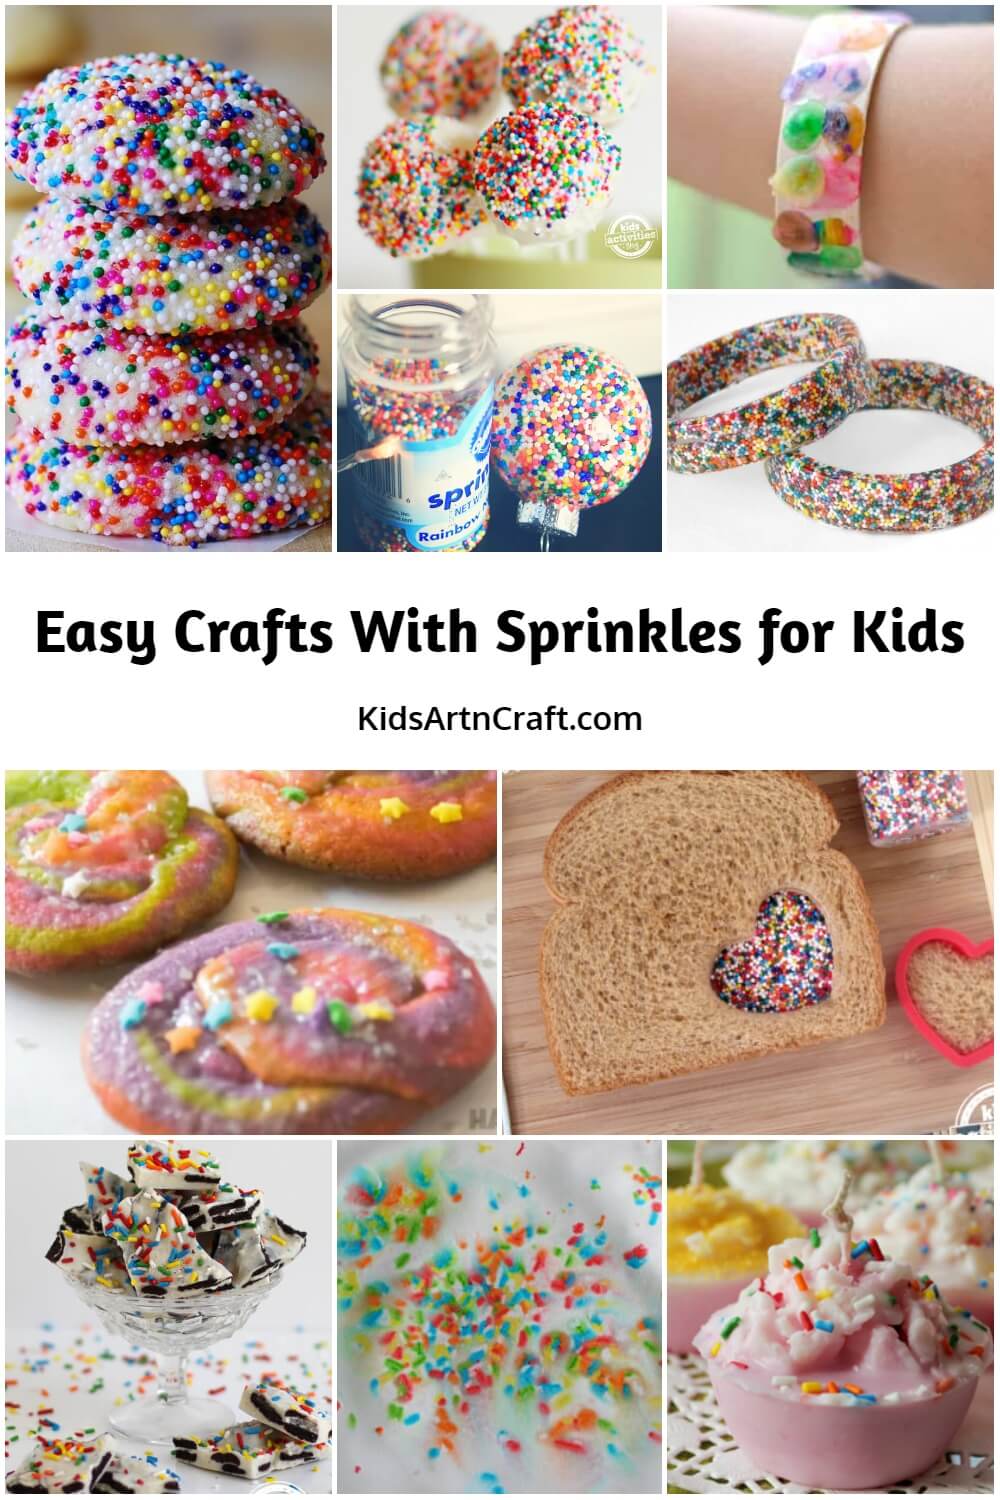 Easy Crafts with Sprinkles for Kids